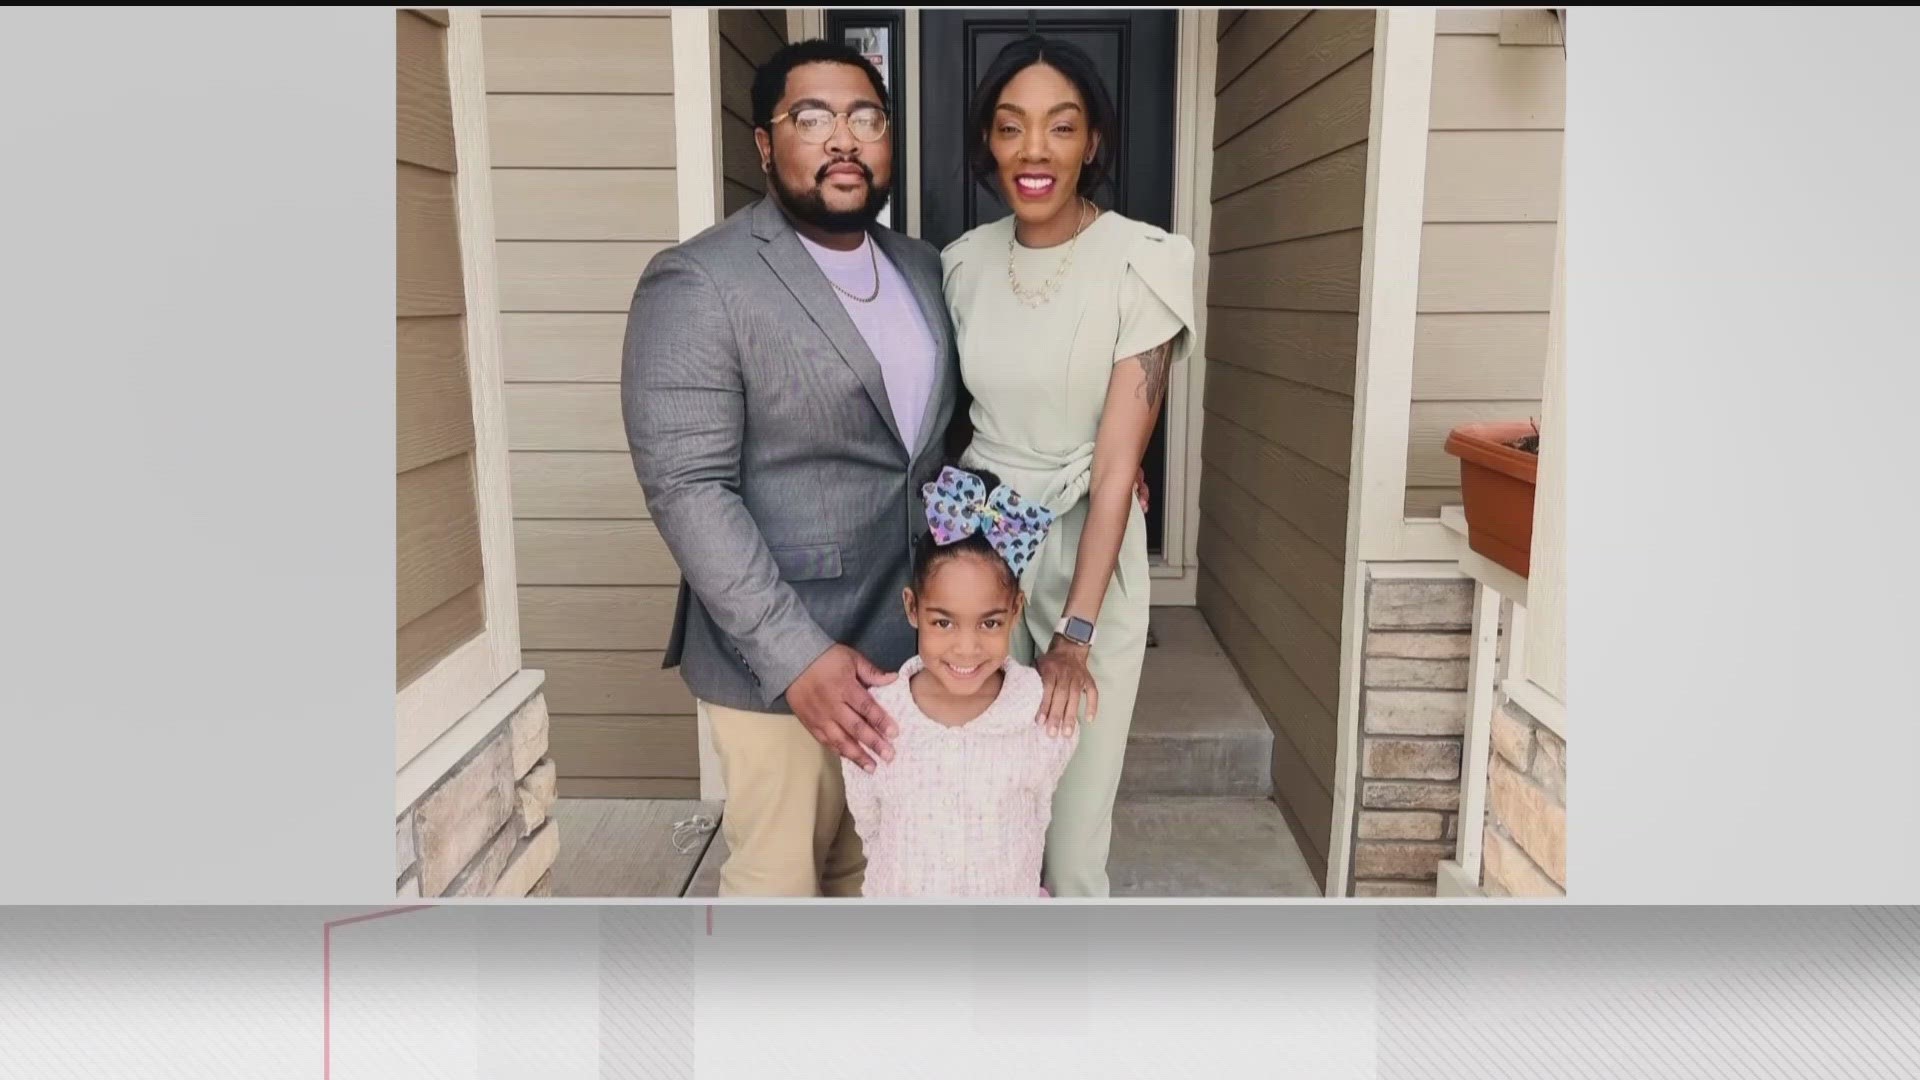 Qualin Campbell was shot and killed in Colorado. Detectives are investigating why no officers showed up in time to help him-- even after his wife called 911.